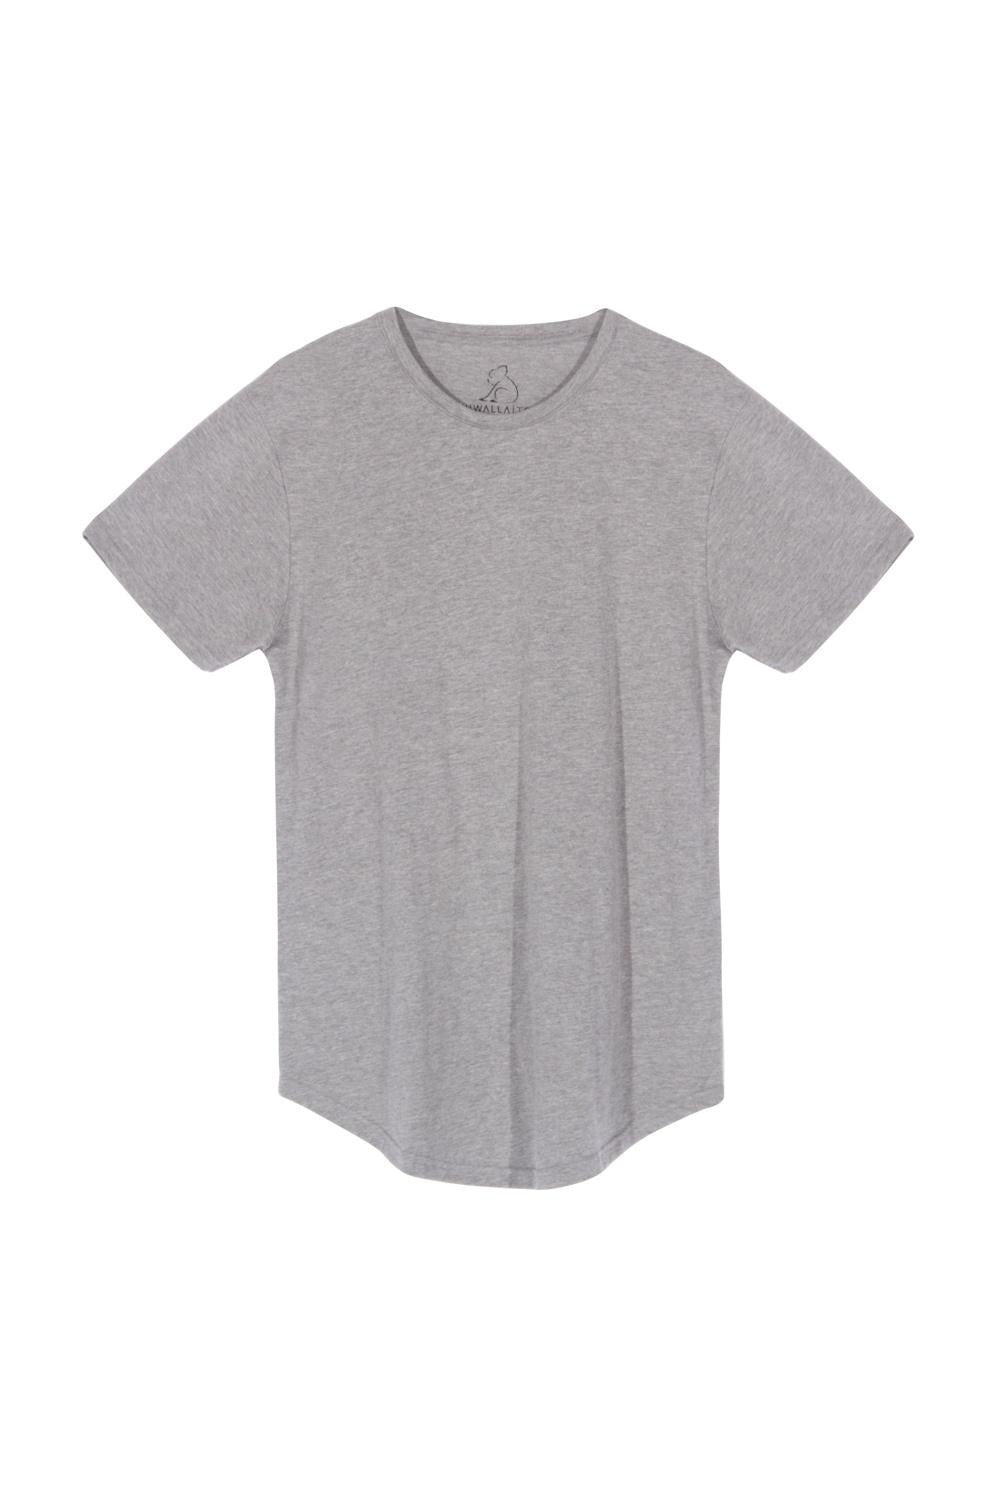 T-Shirt Eazy Scoop Gris Chiné Kuwalla Tee